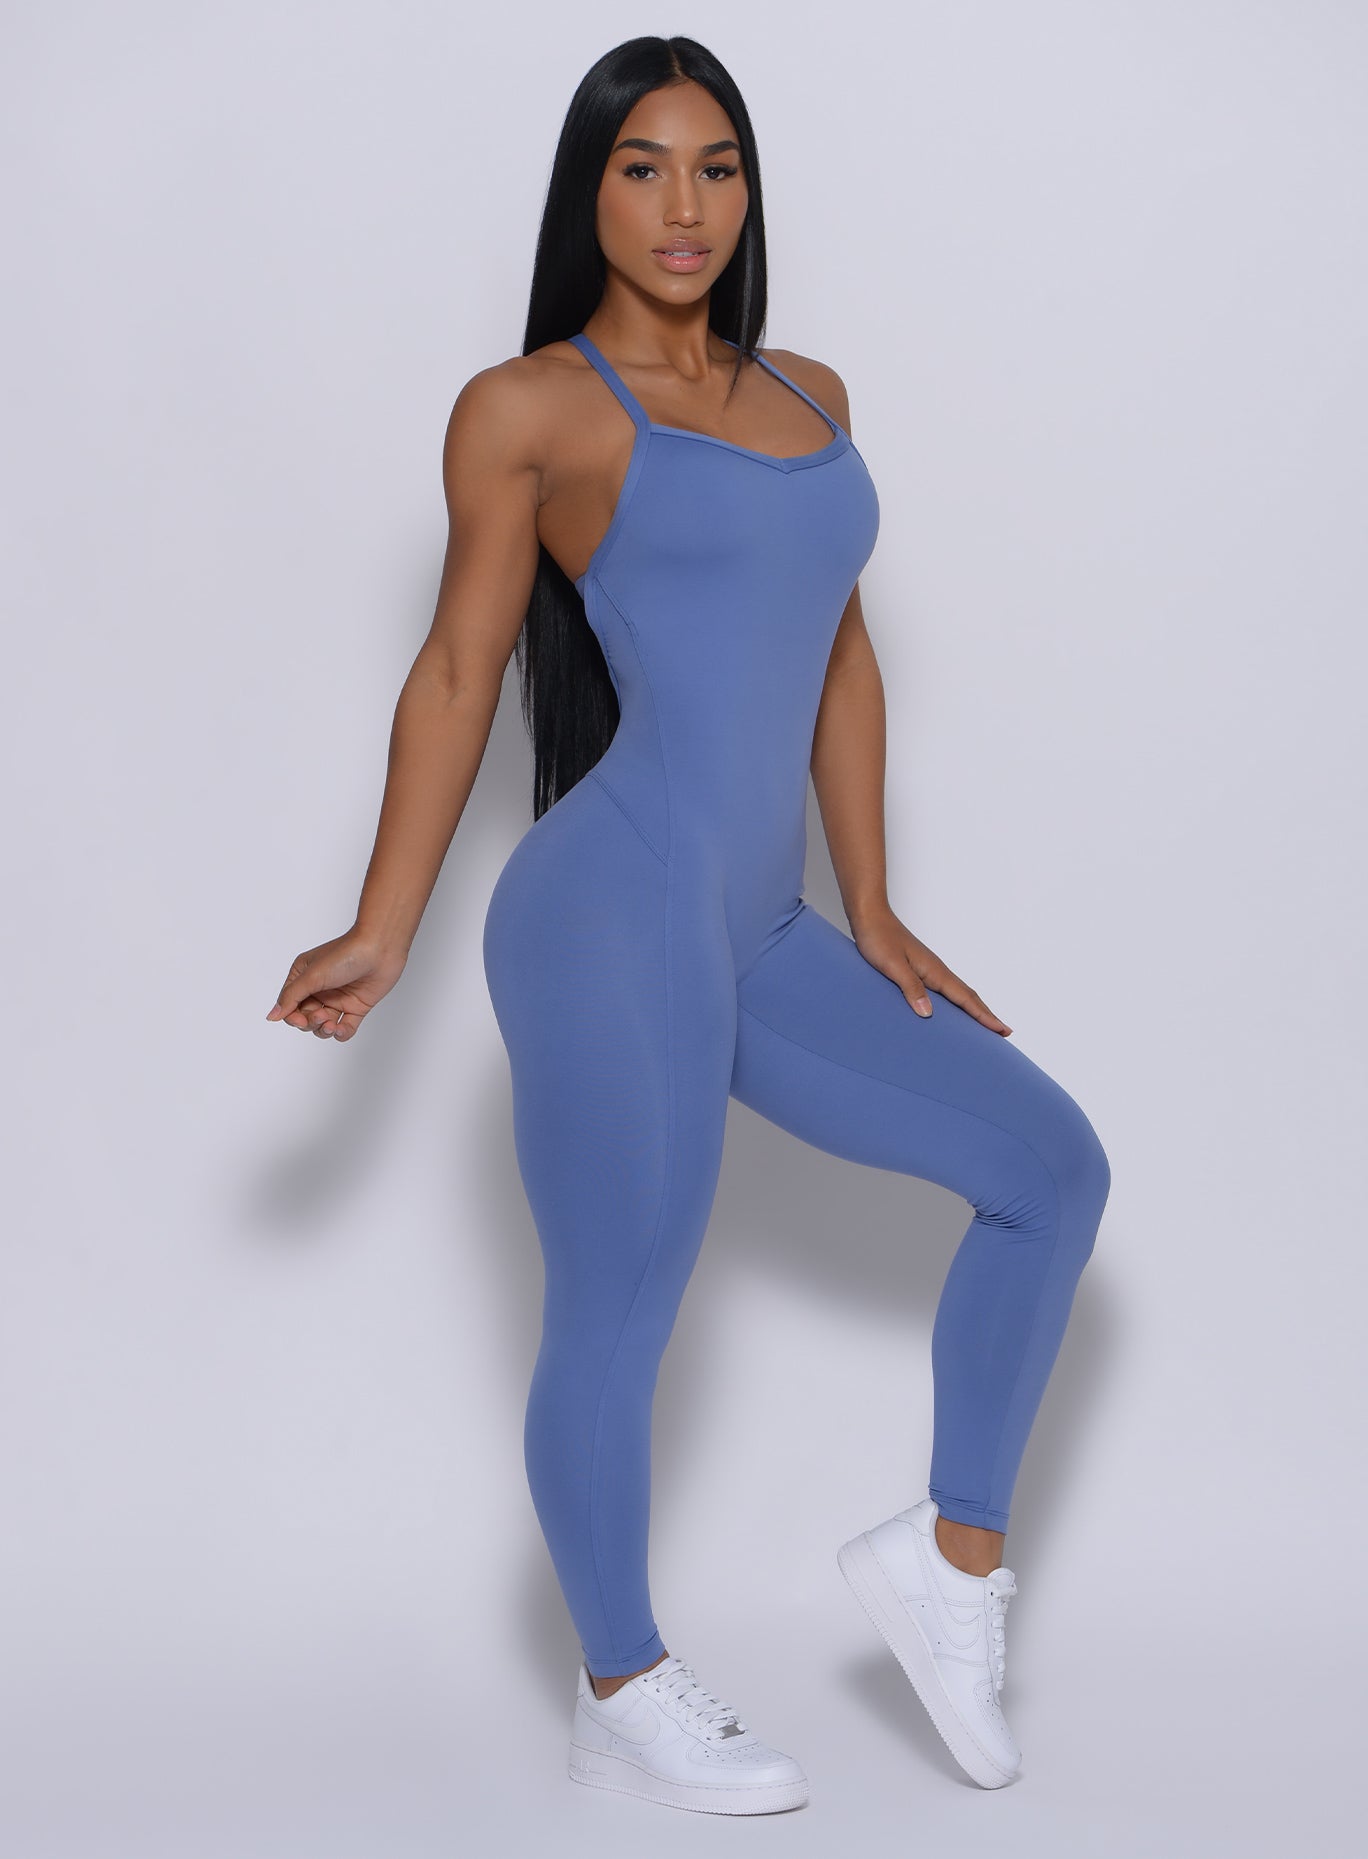 Right side profile view of a model angled right wearing our sculpted bodysuit in denim blue color